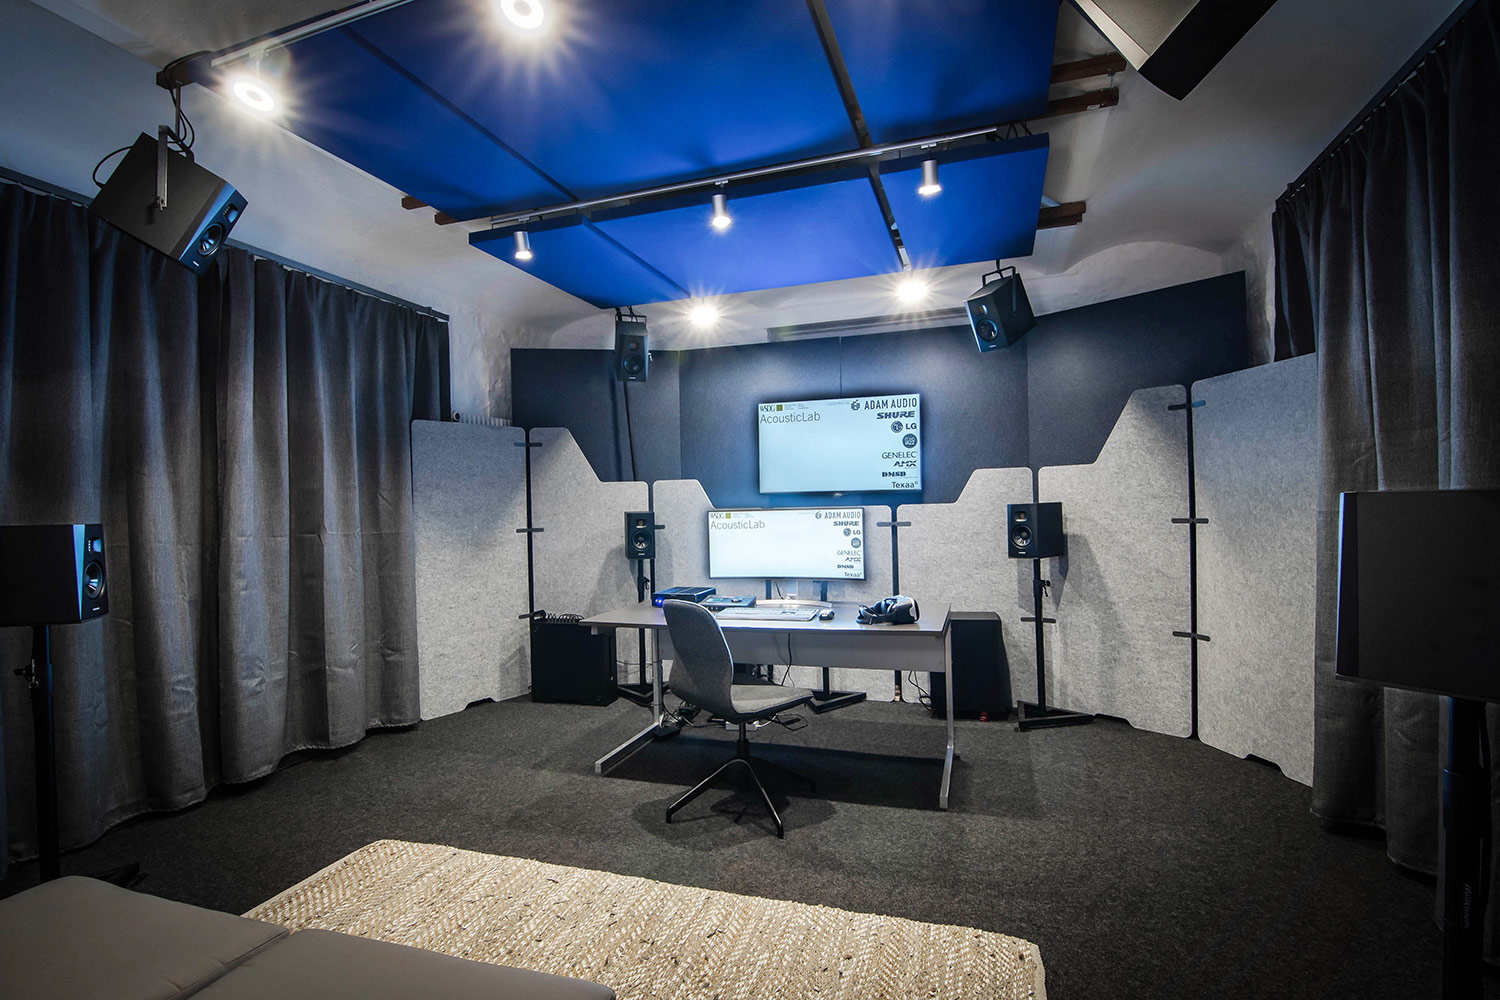 WSDG AcousticLab in Basel, Switzerland. Space design to properly